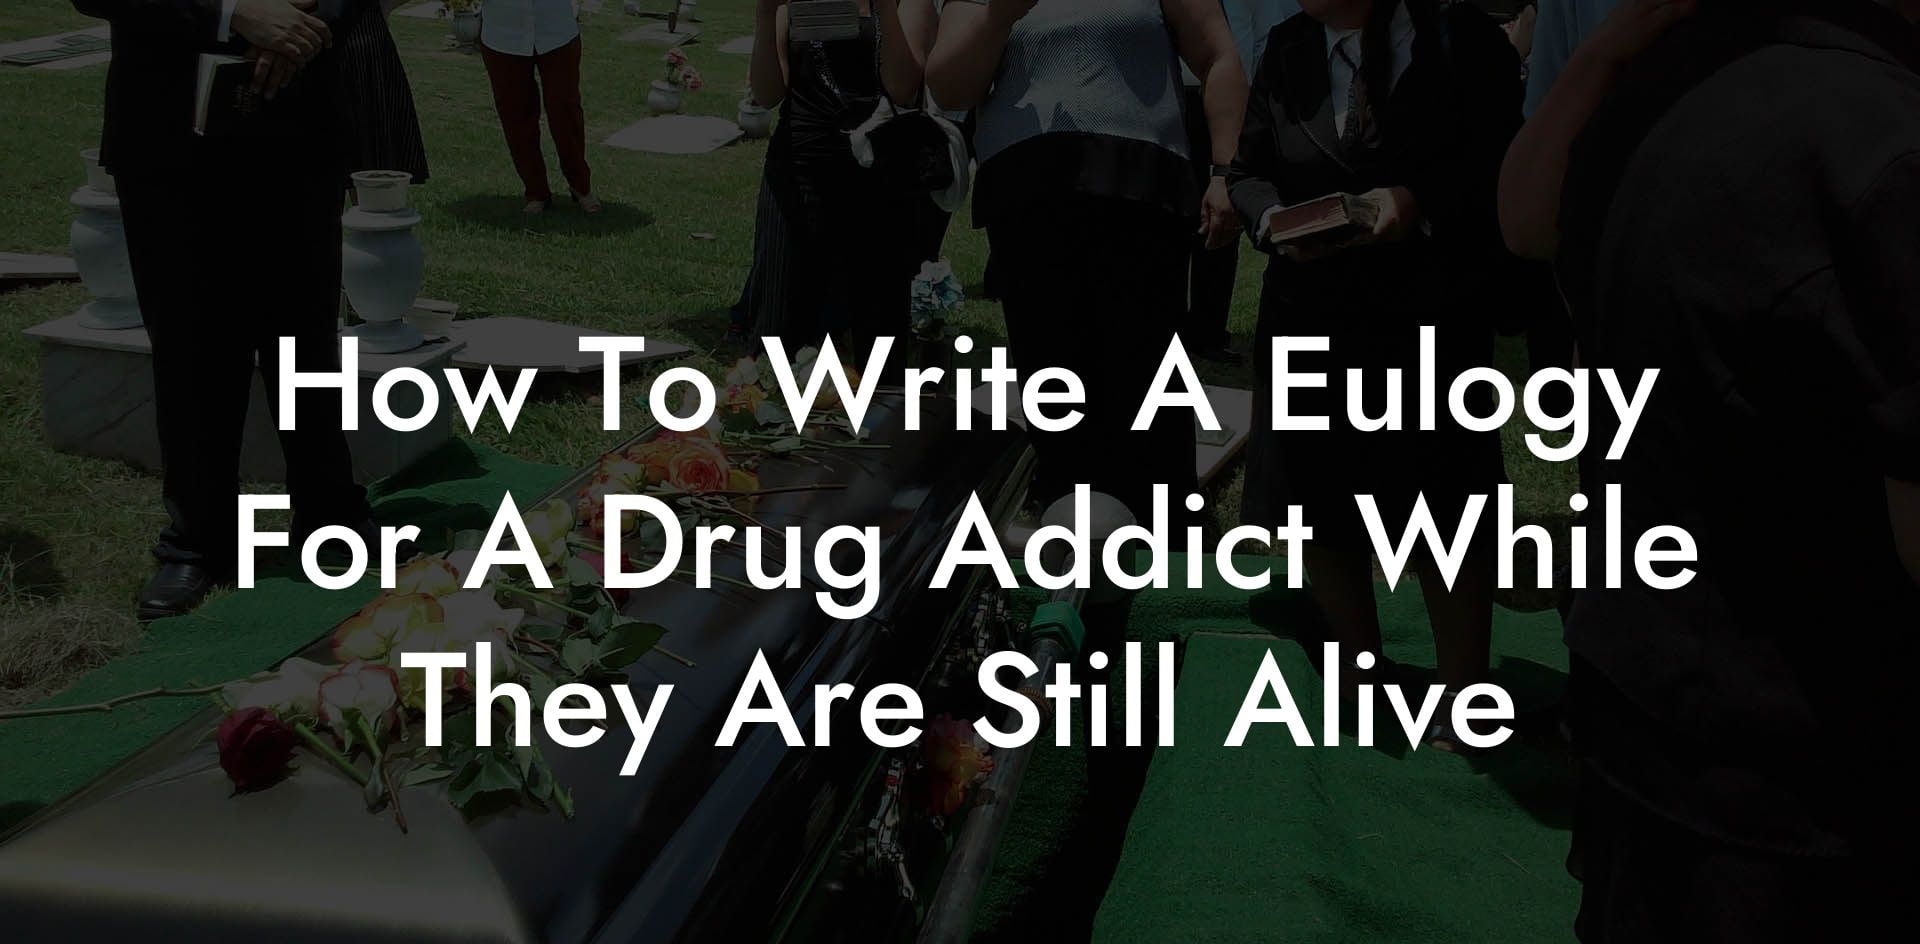 How To Write A Eulogy For A Drug Addict While They Are Still Alive